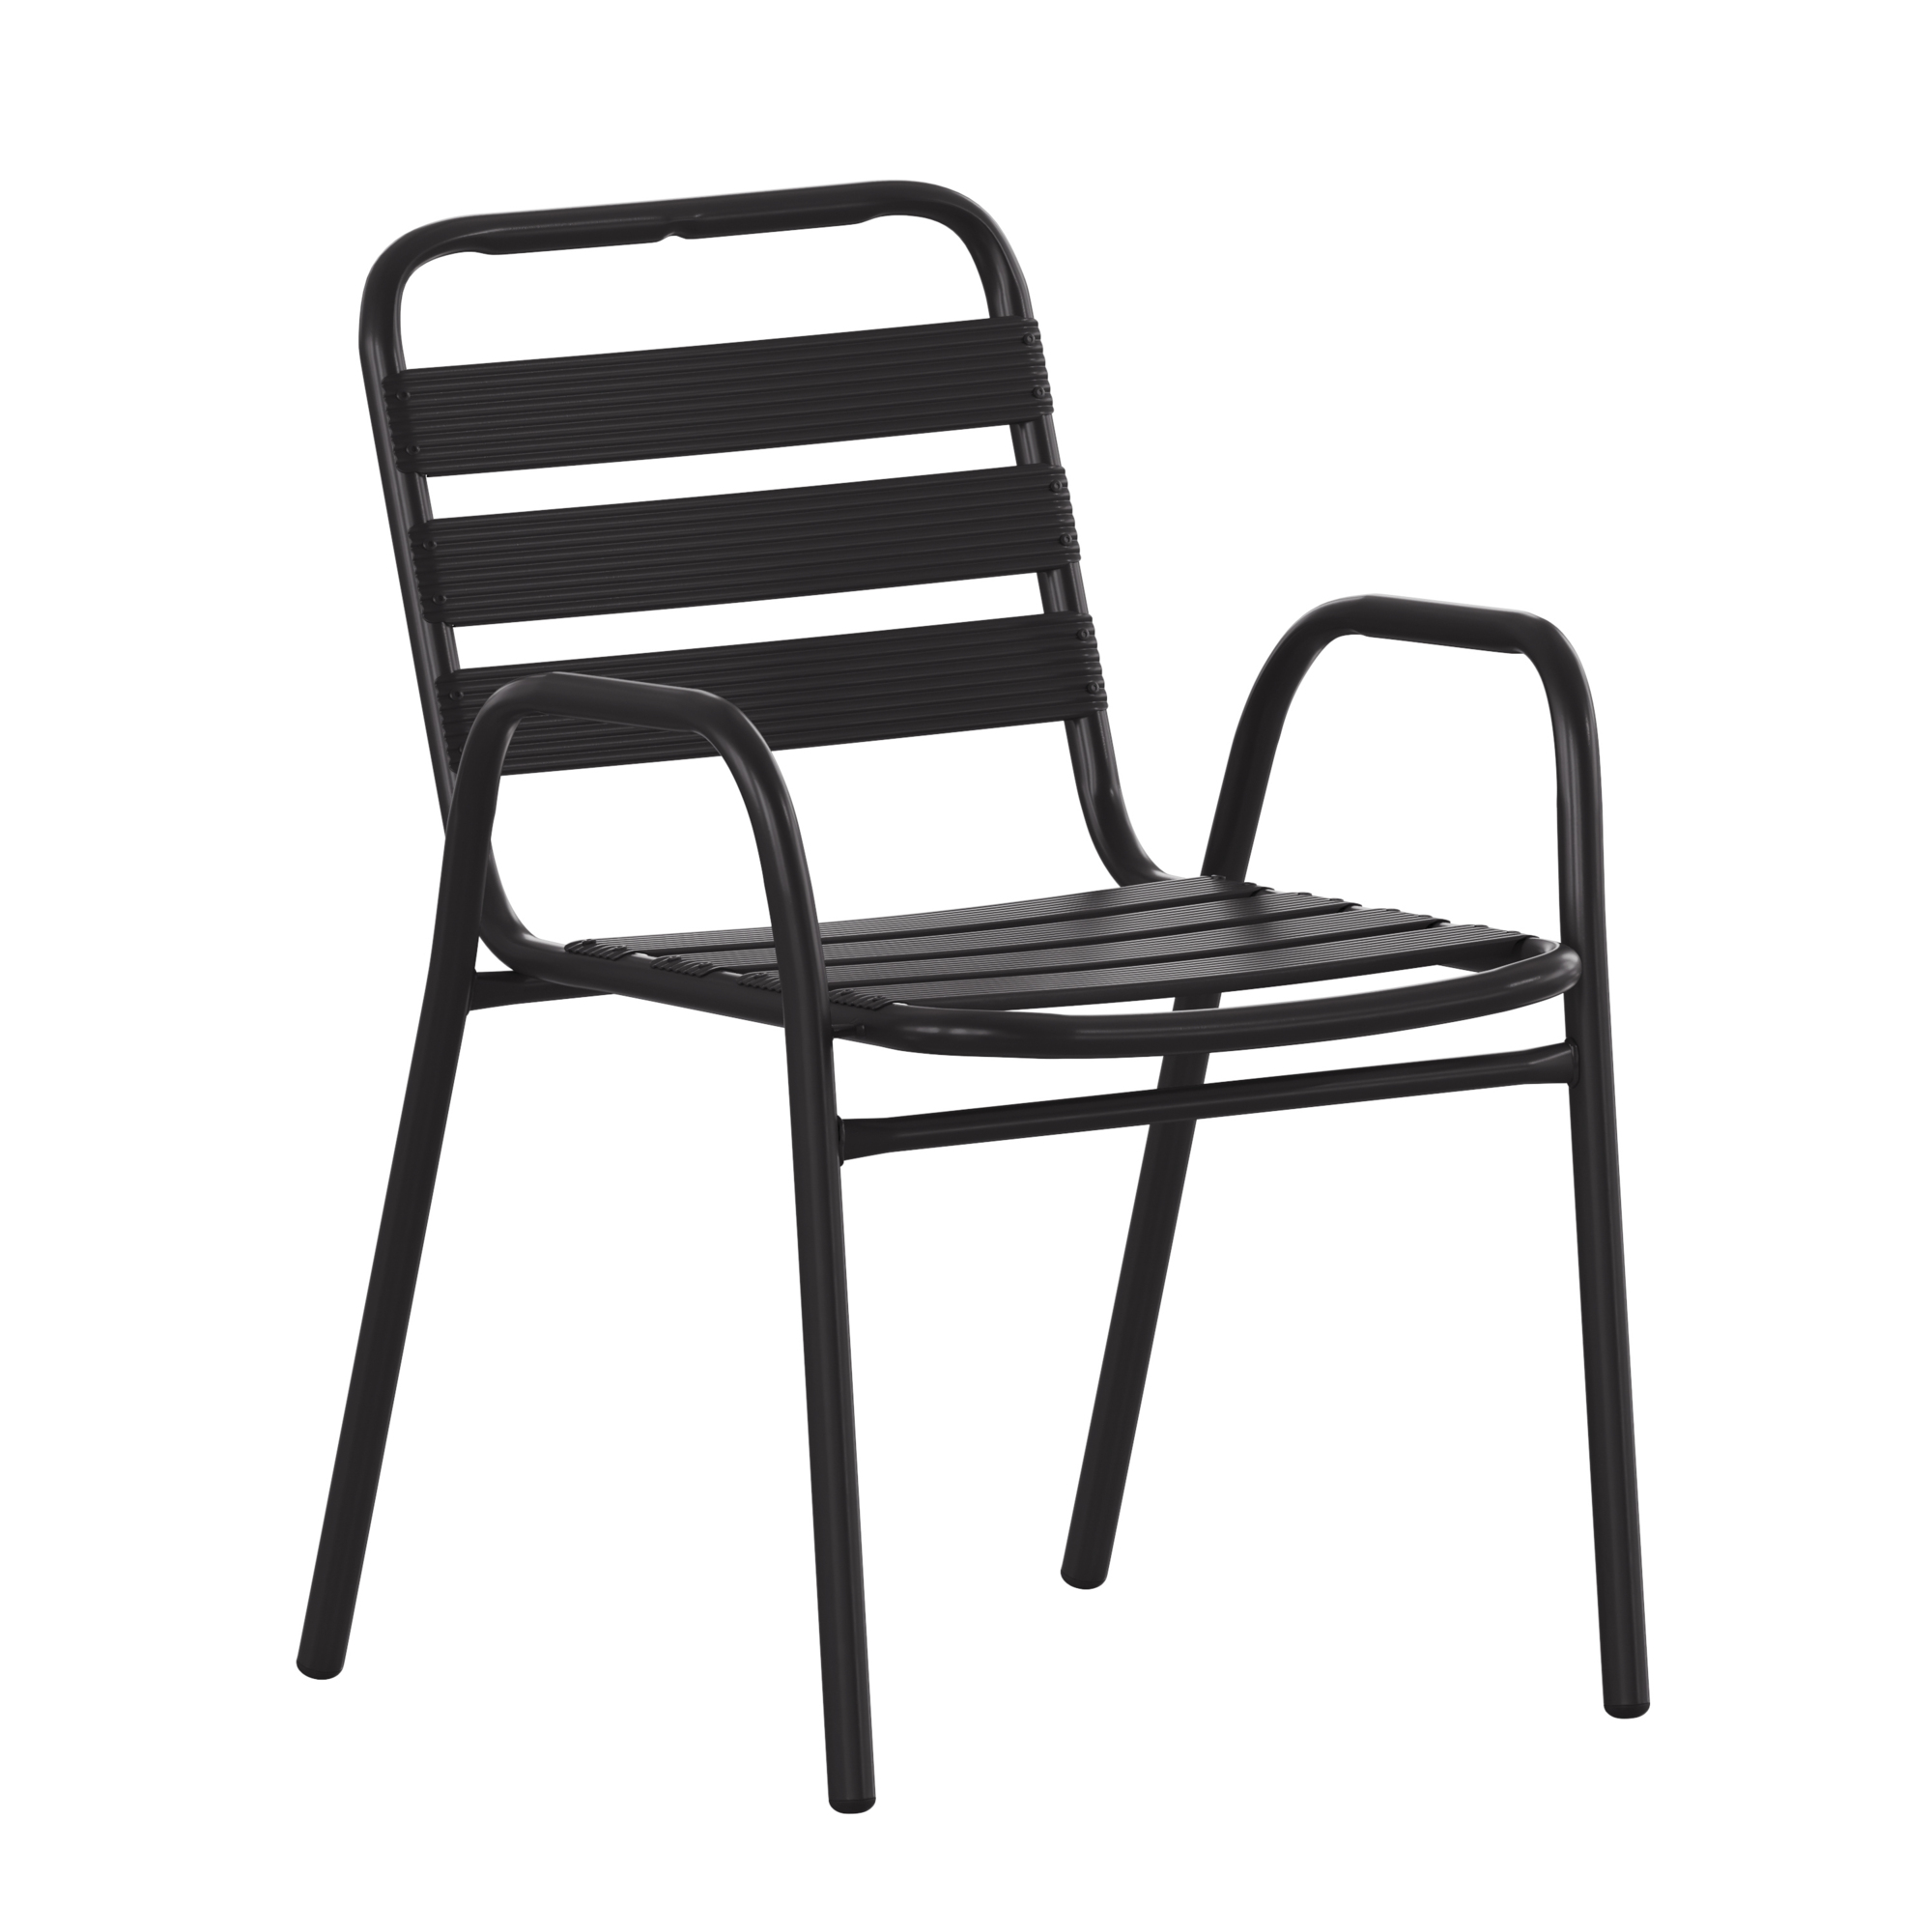 Flash Furniture, Commercial Black Restaurant Stack Chair with Arms, Primary Color Black, Material Aluminum, Width 21.25 in, Model TLH018CBK